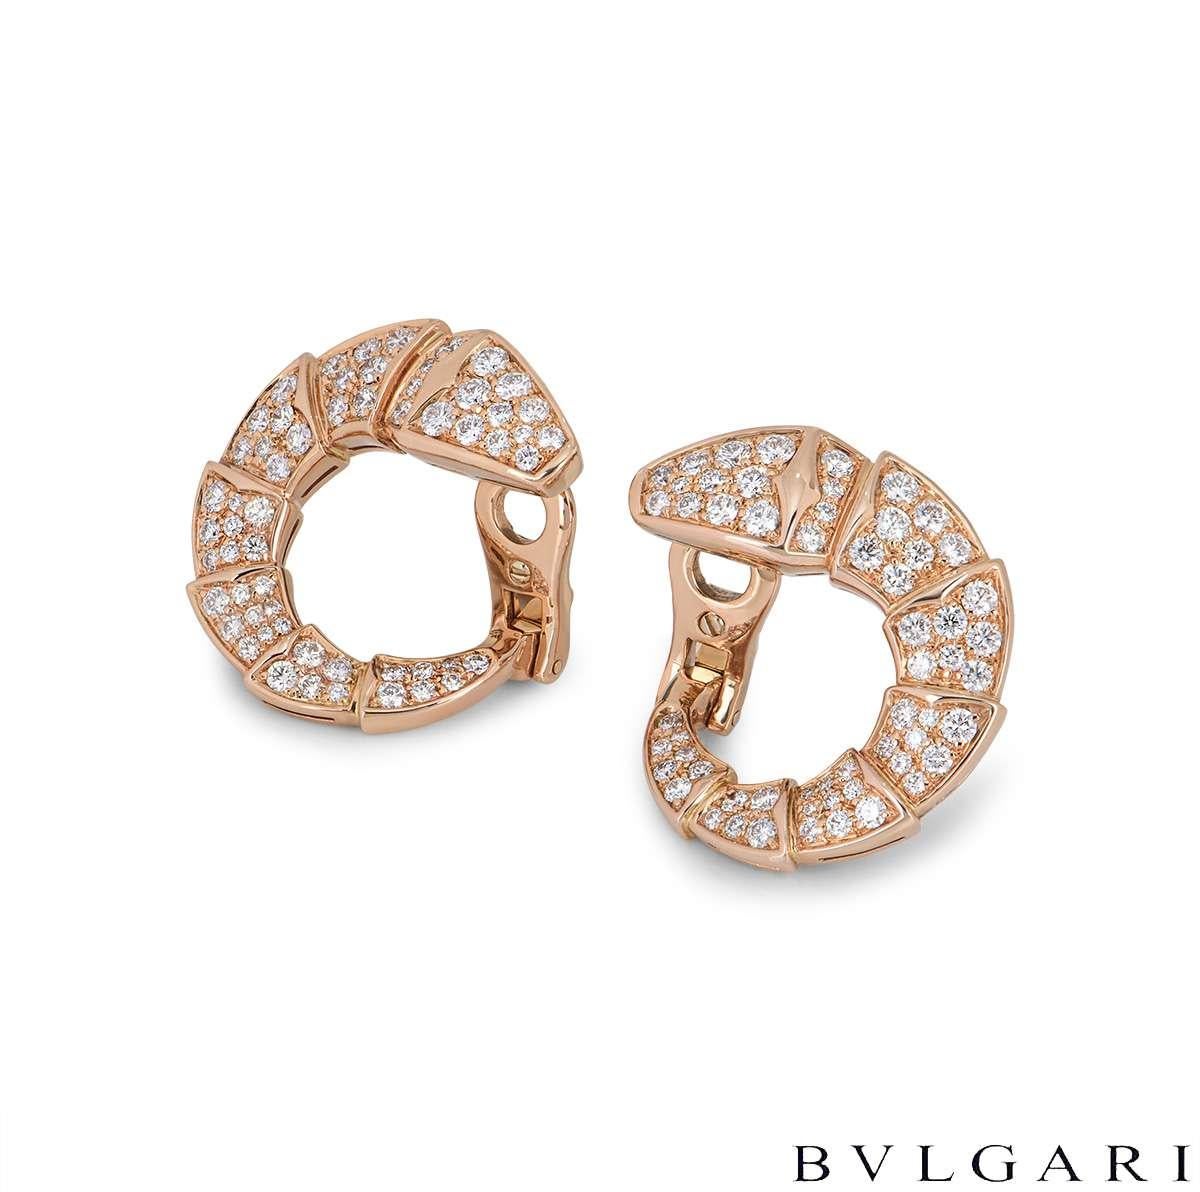 An 18k rose gold pair of diamond earrings by Bvlgari from the Serpenti collection. The earrings are in the shape of the iconic Bvlgari Serpenti snake set with pave round brilliant cut diamonds throughout the intersected body. There are 114 round